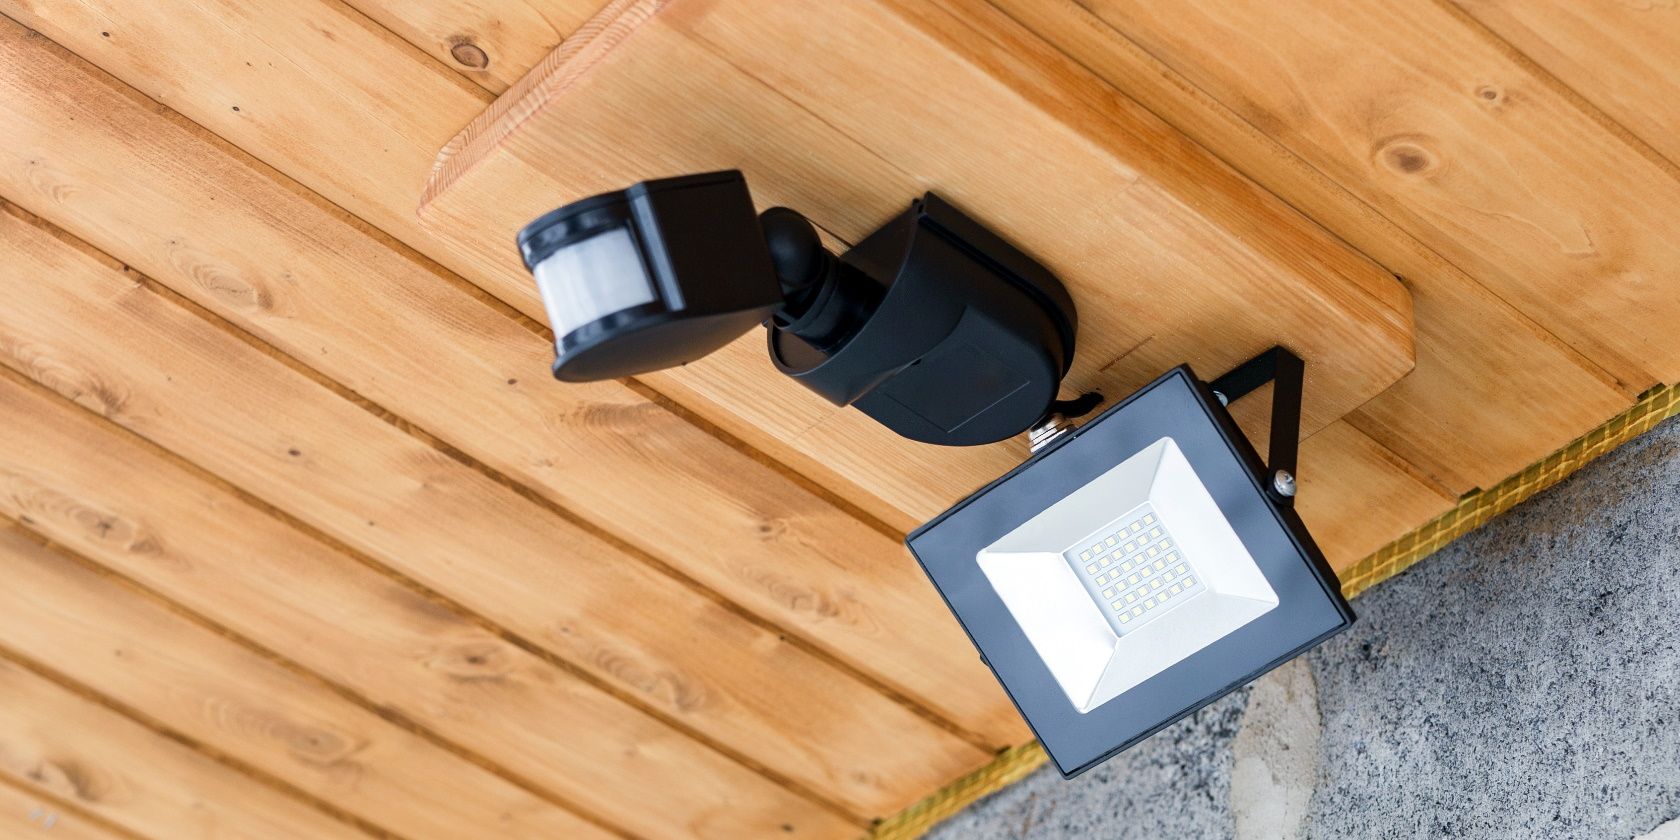 Outdoor led lantern with motion sensor.  Water resistant diode street lamp.  Electricity savings